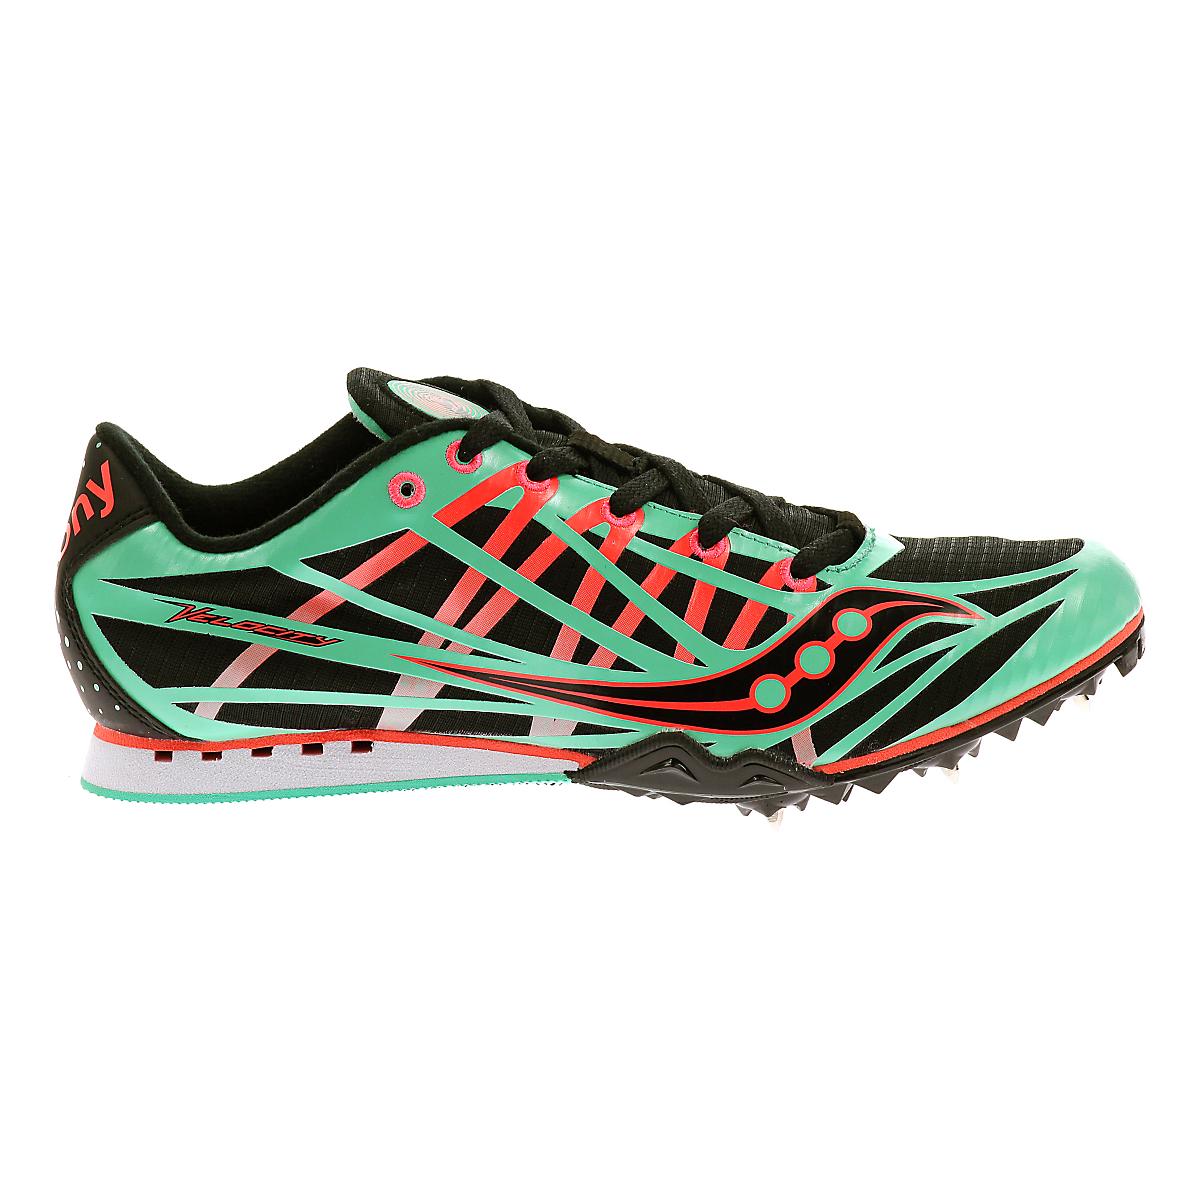 Womens Saucony Kilkenny XC 3 Spike Cross Country Shoe at Road Runner Sports